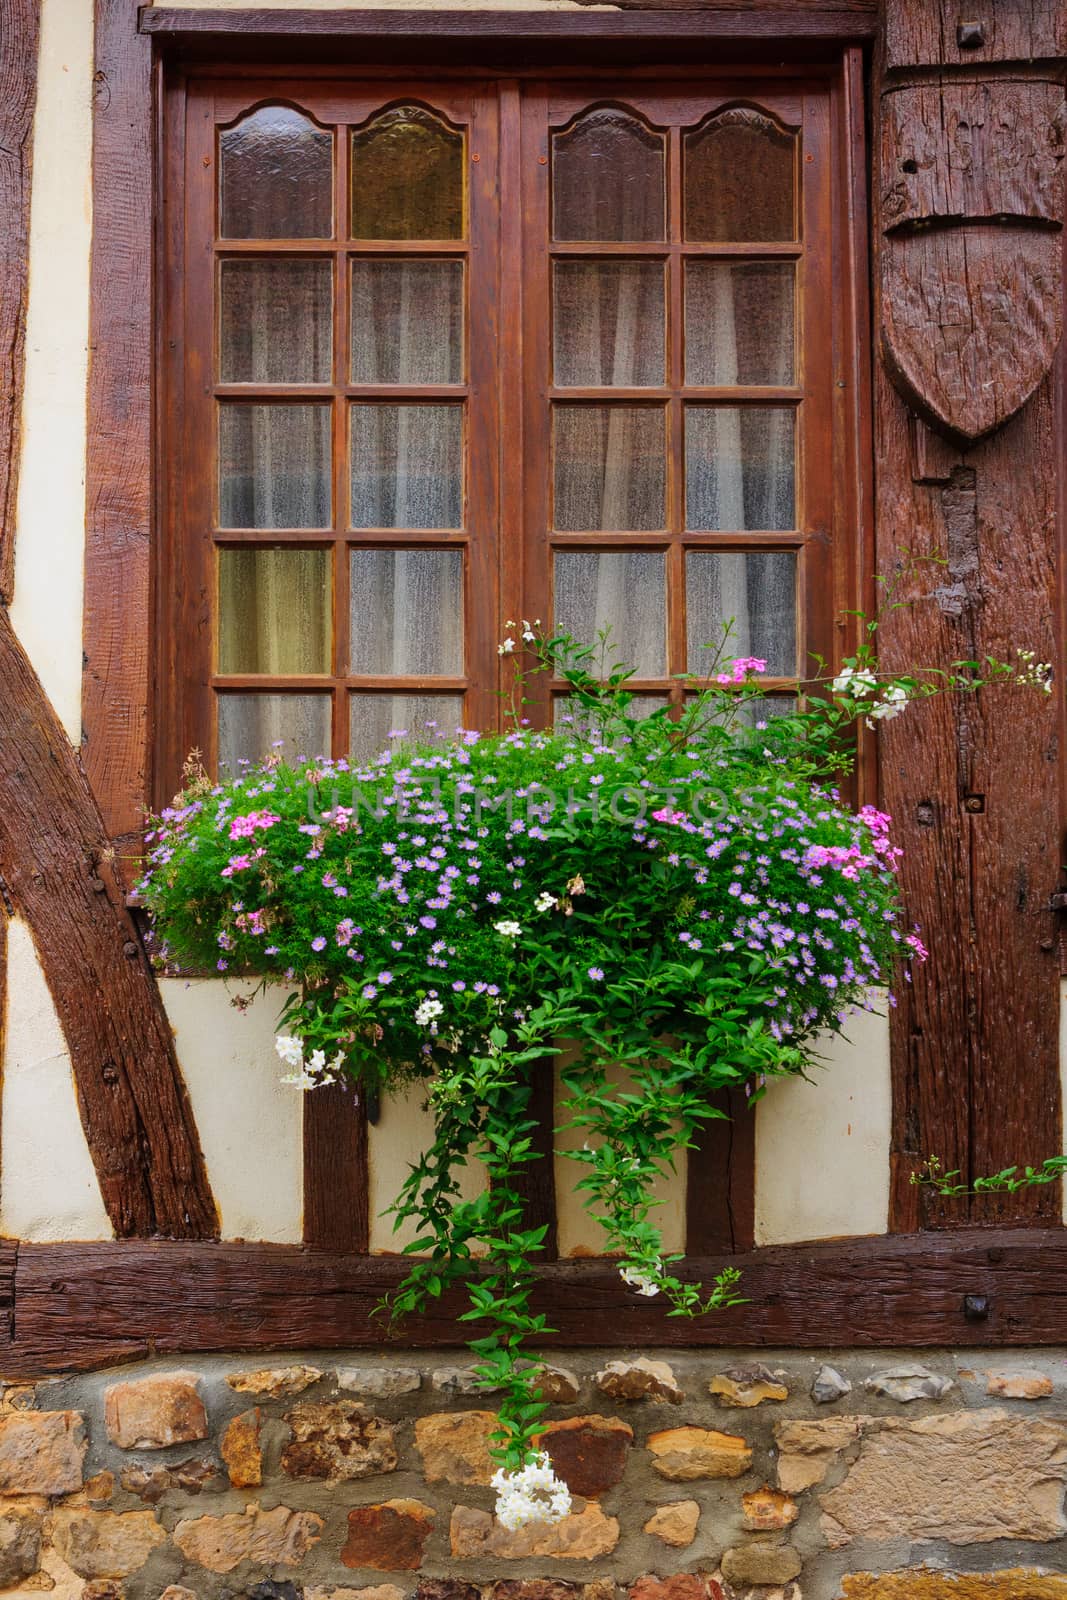 Typical window of a Half-timbered house, in Orbec, Normandy, France